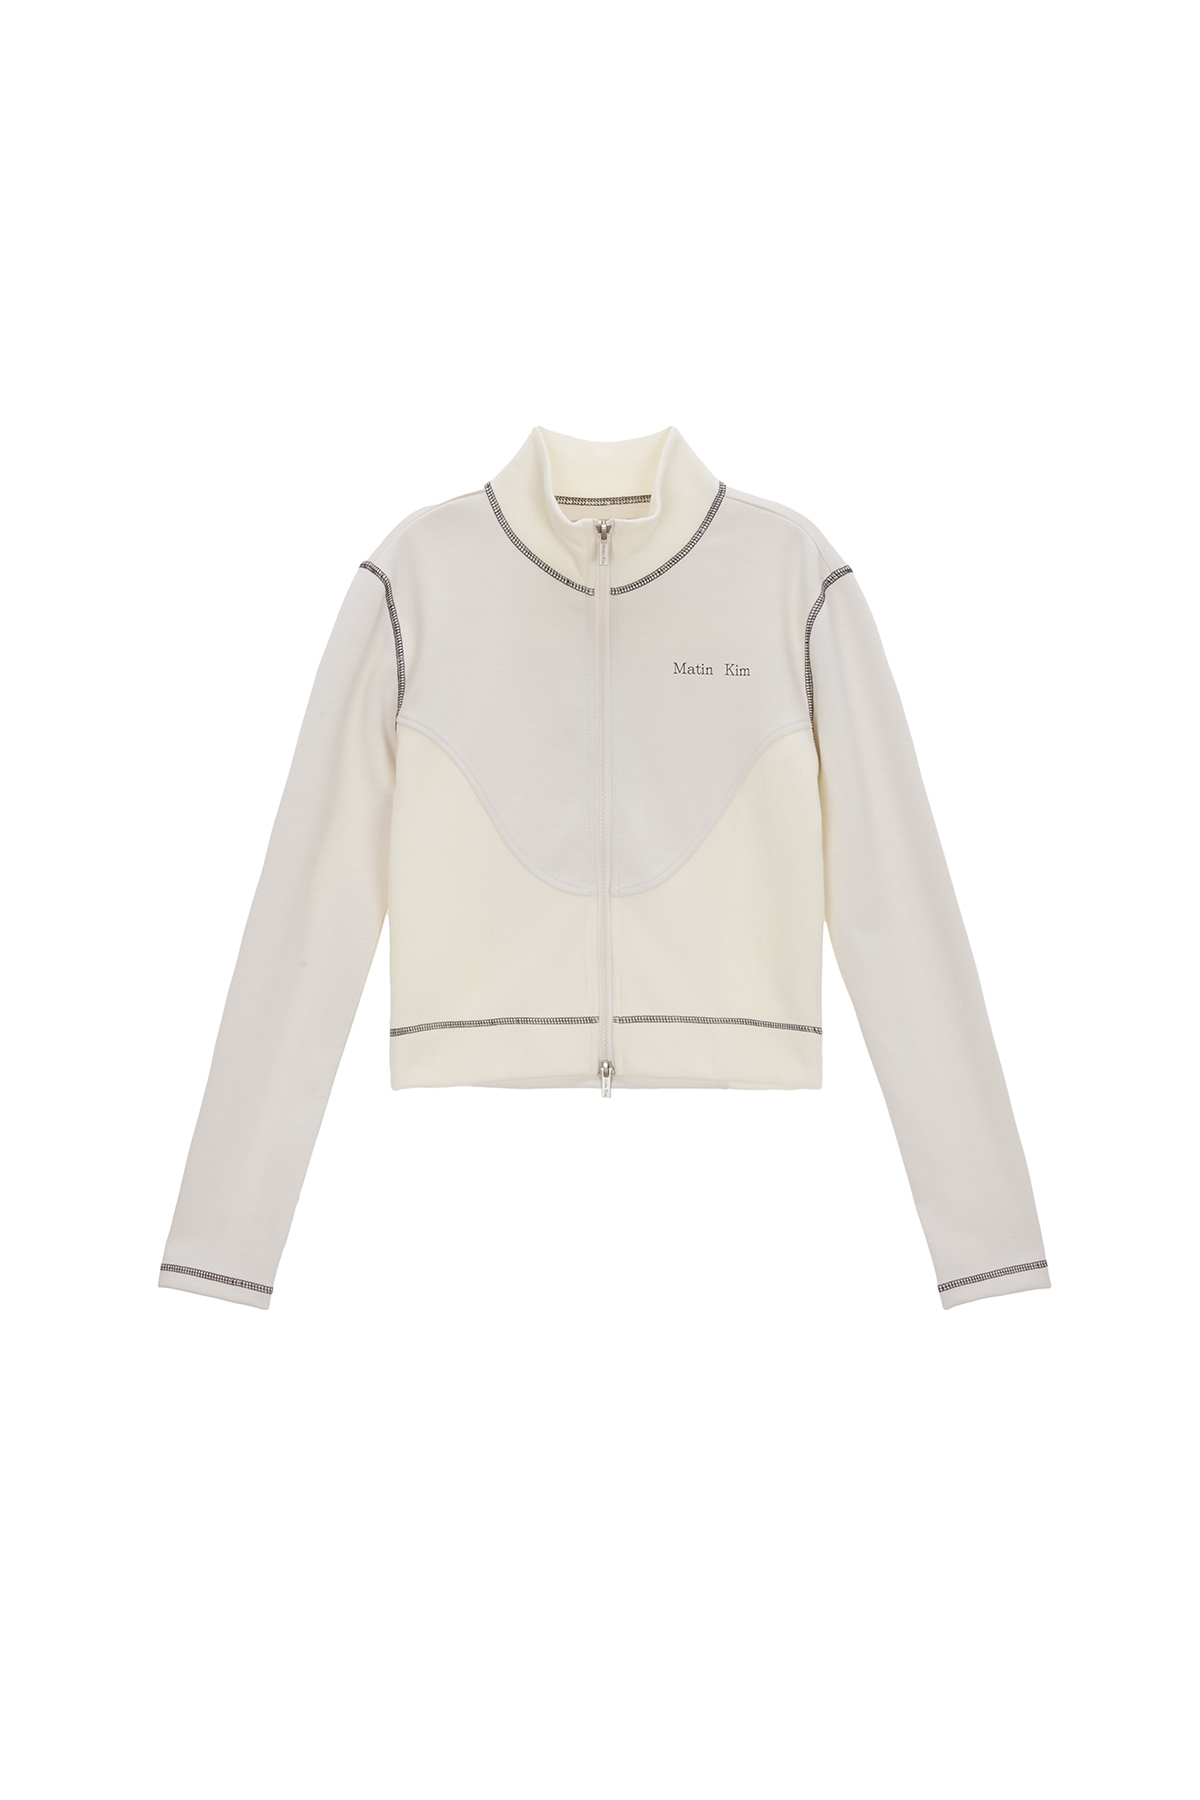 HIGH NECK JERSEY ZIP UP IN IVORY